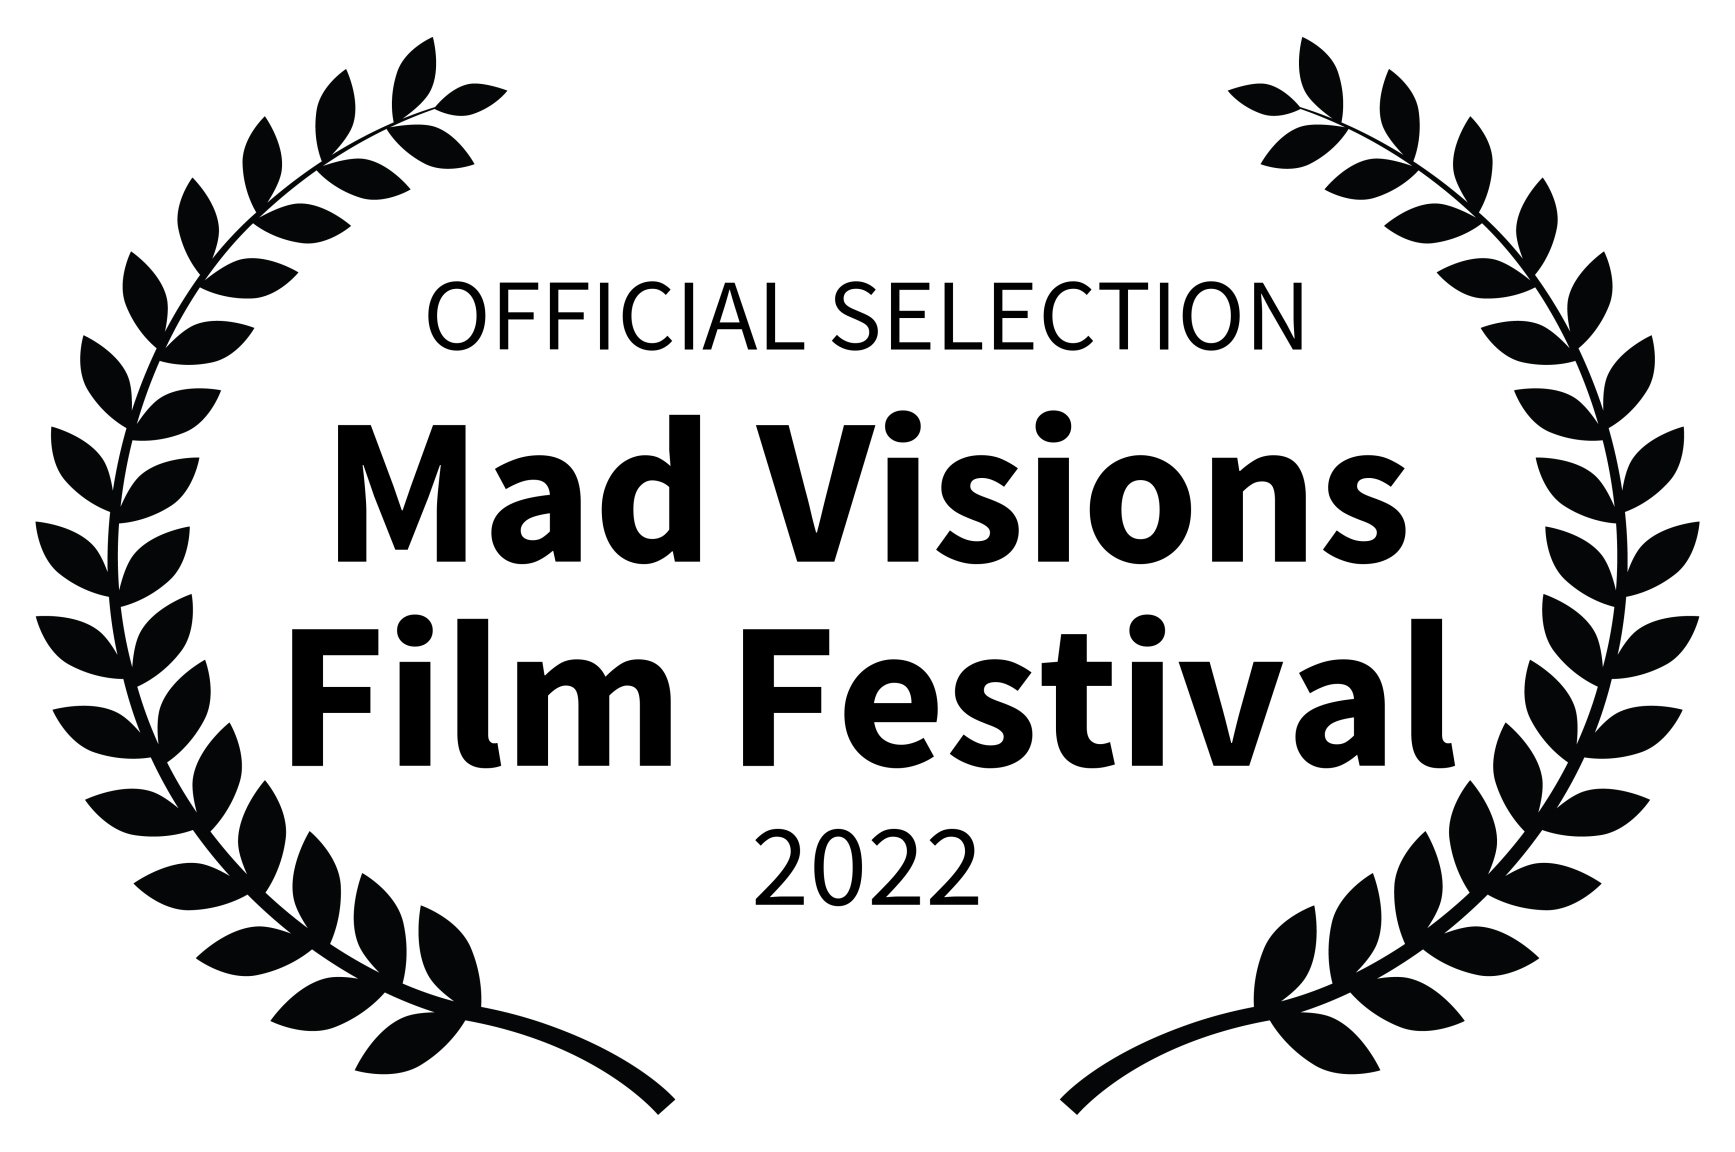 OFFICIAL SELECTION - Mad Visions Film Festival - 2022 copy.jpg